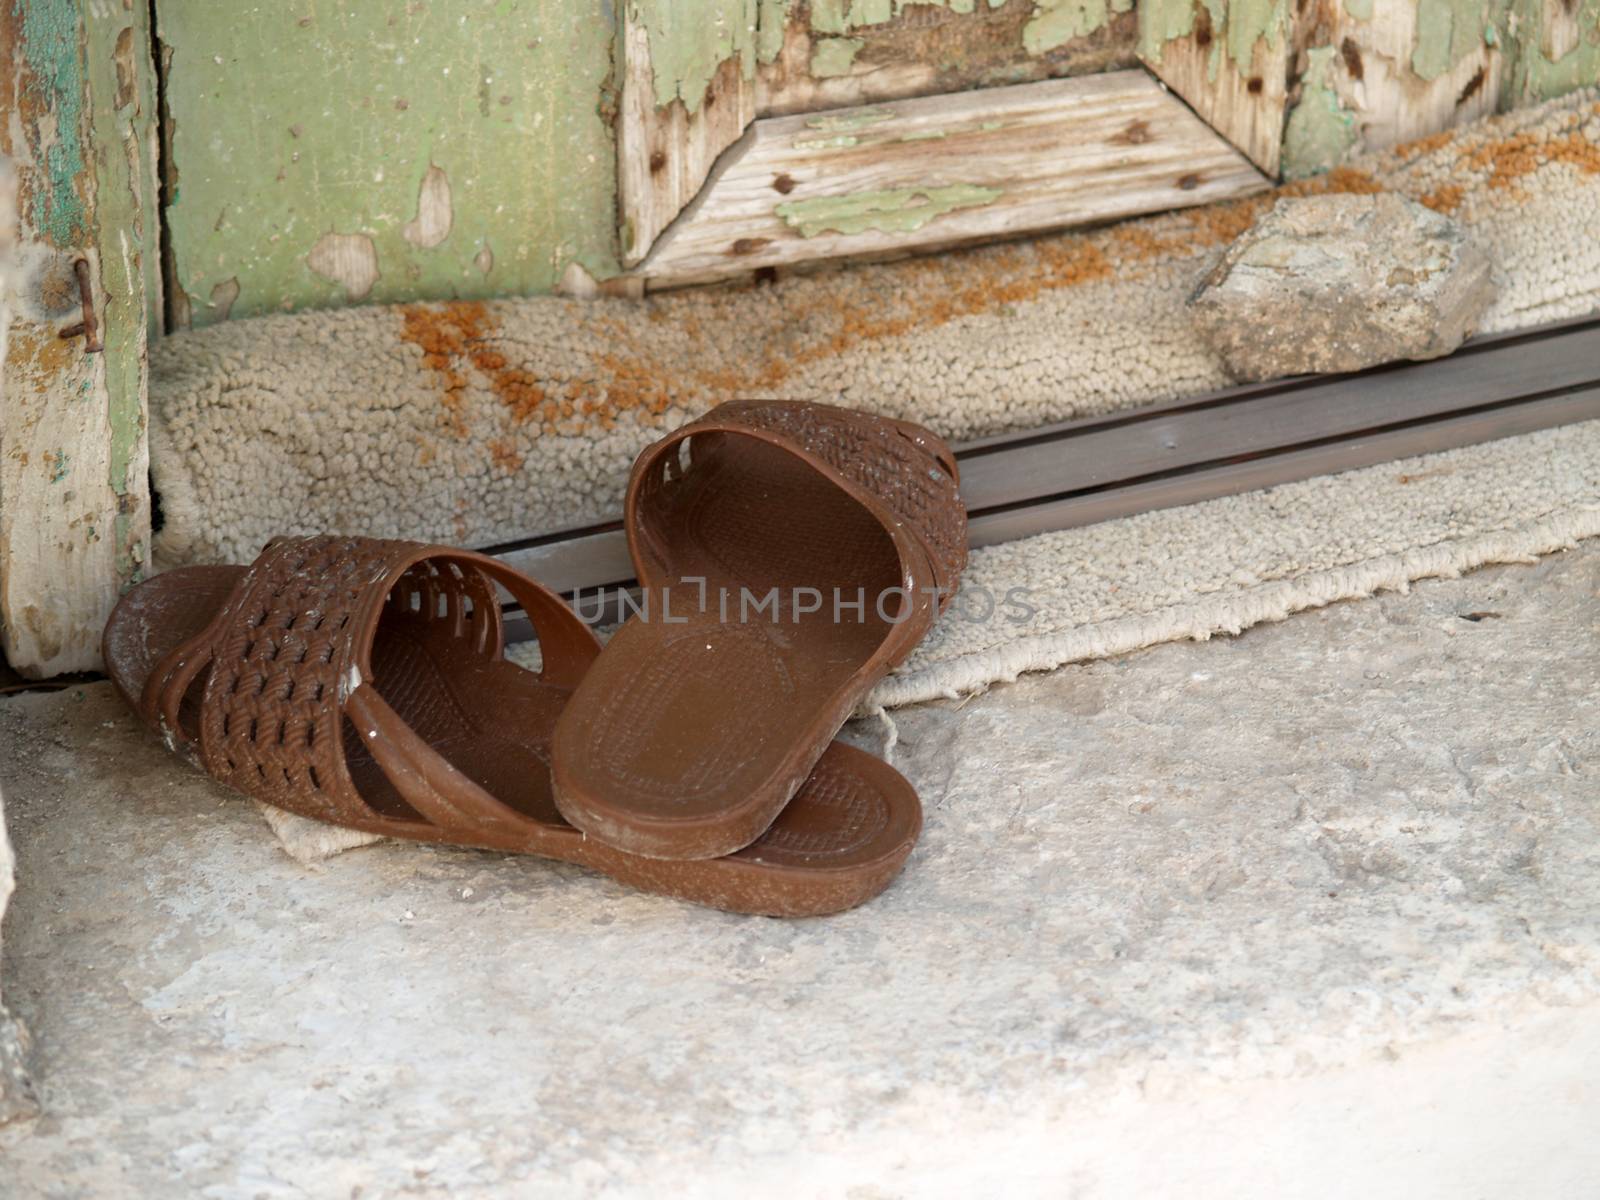 Plastic slippers at the doorstep by Portokalis